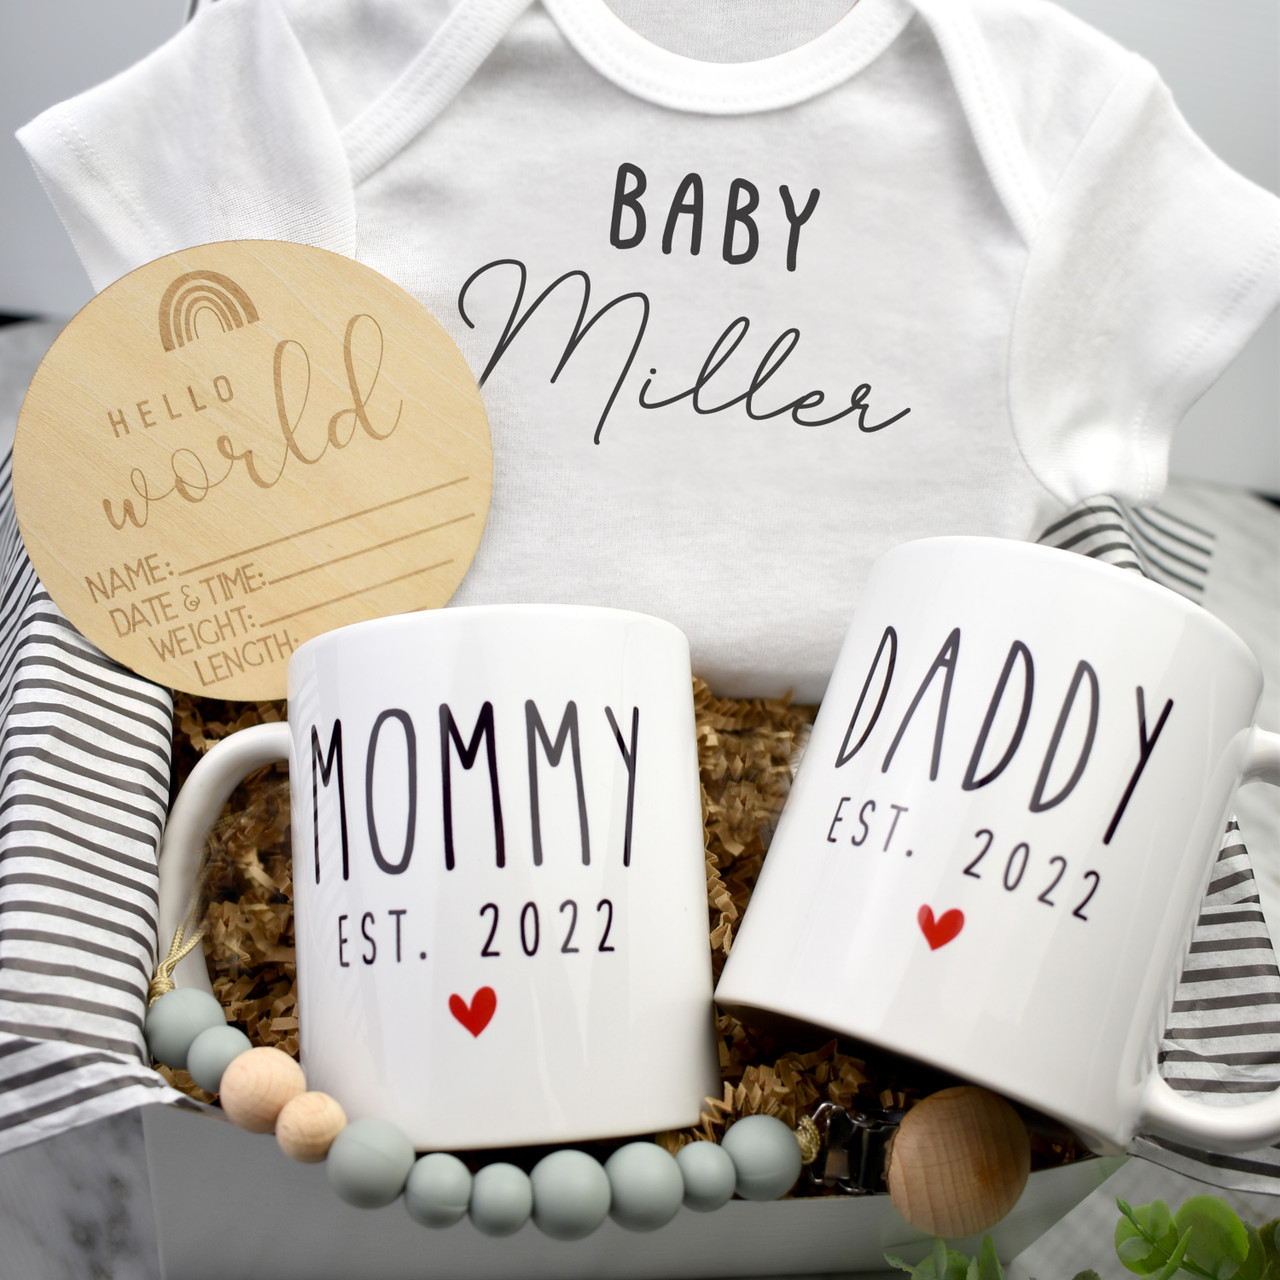 New Parent Gift Ideas for Moms and Dads, Vancouver